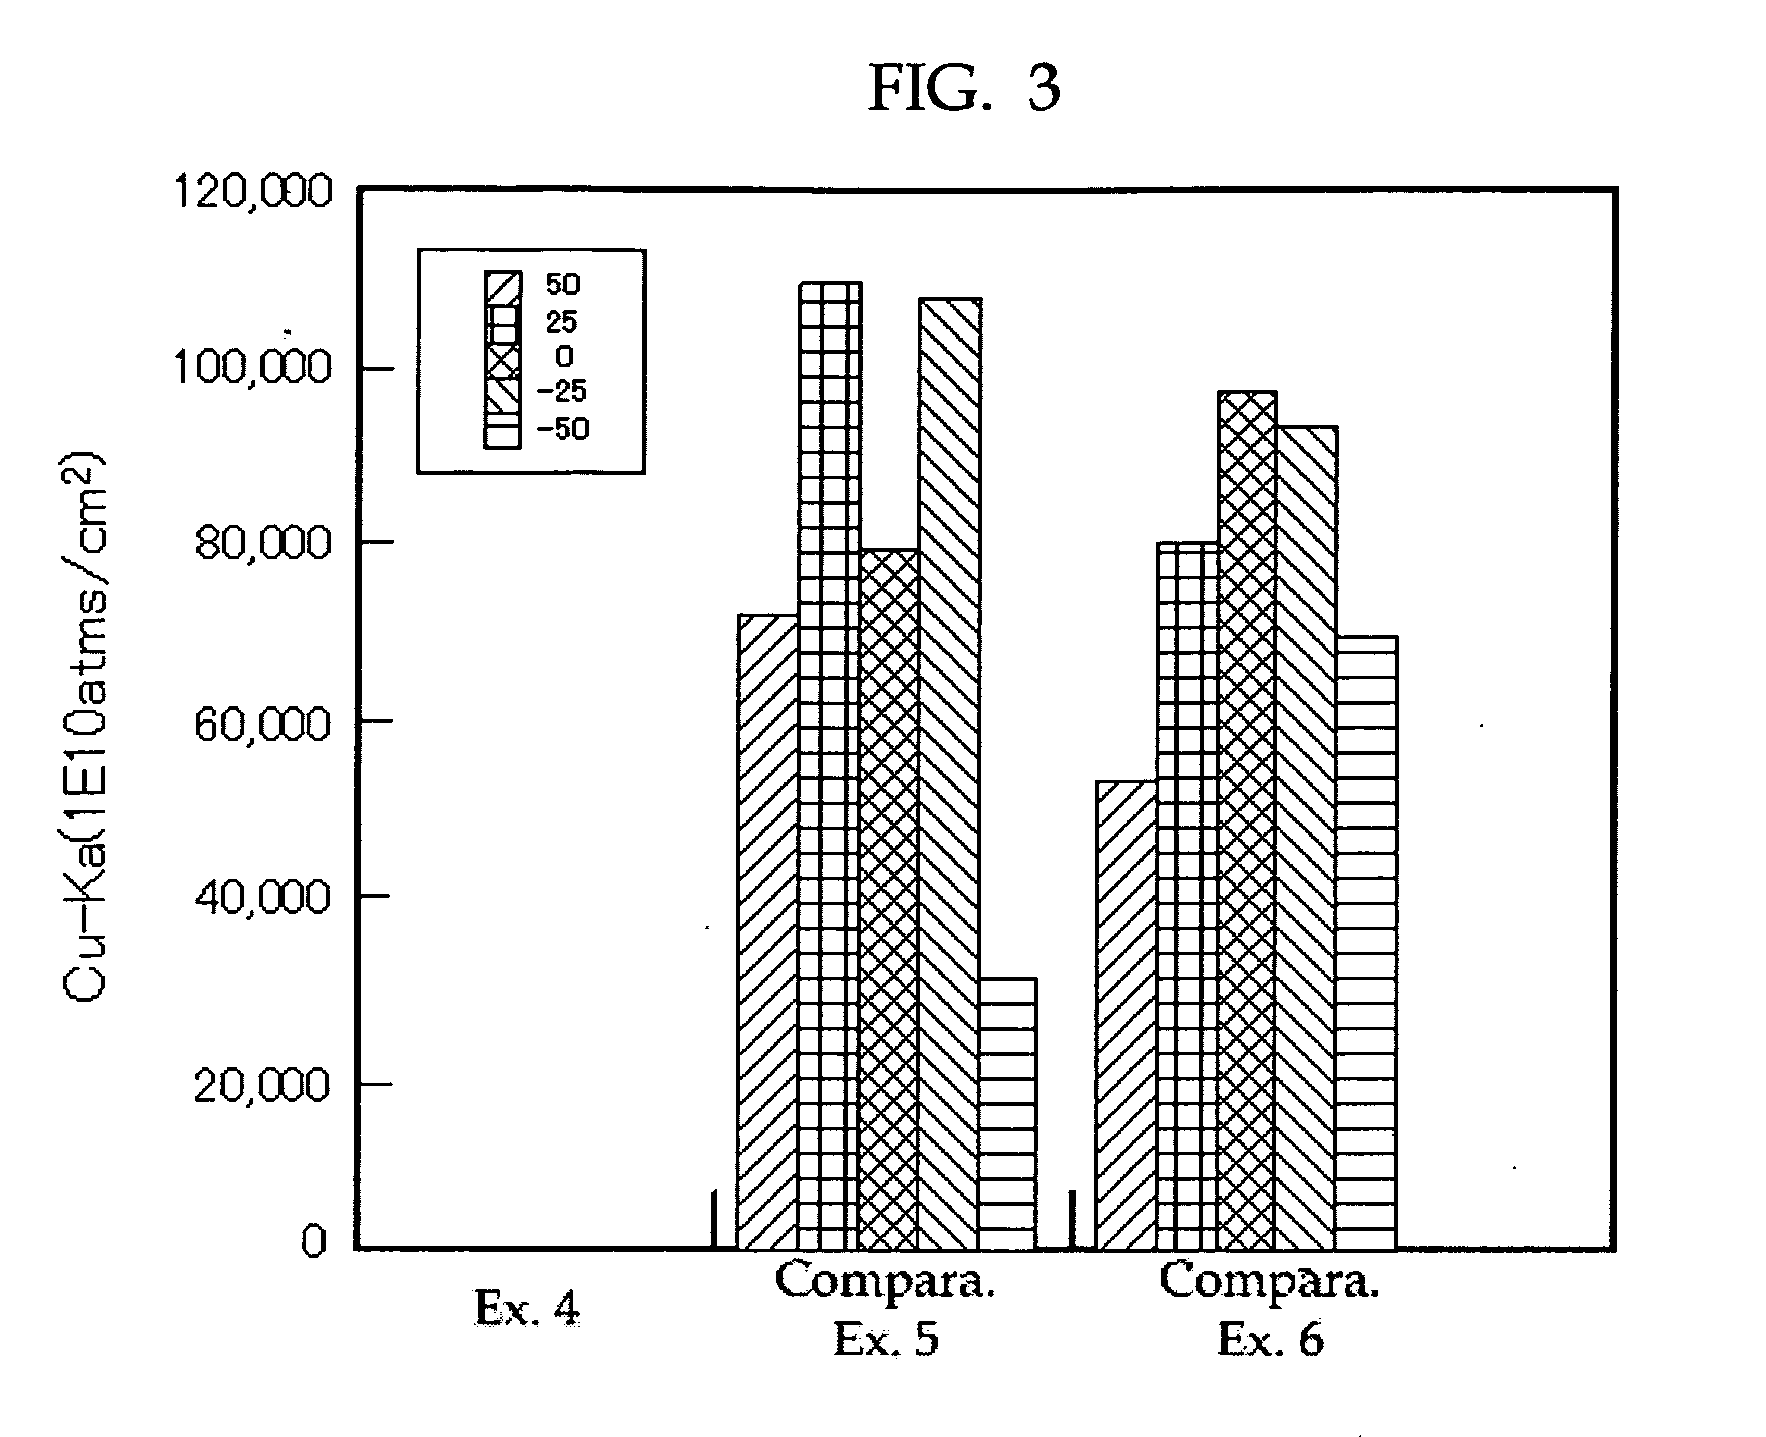 Method for reducing metal, multilayer interconnection structure and manufacturing method for the same, and semiconductor device and manufacturing method for the same